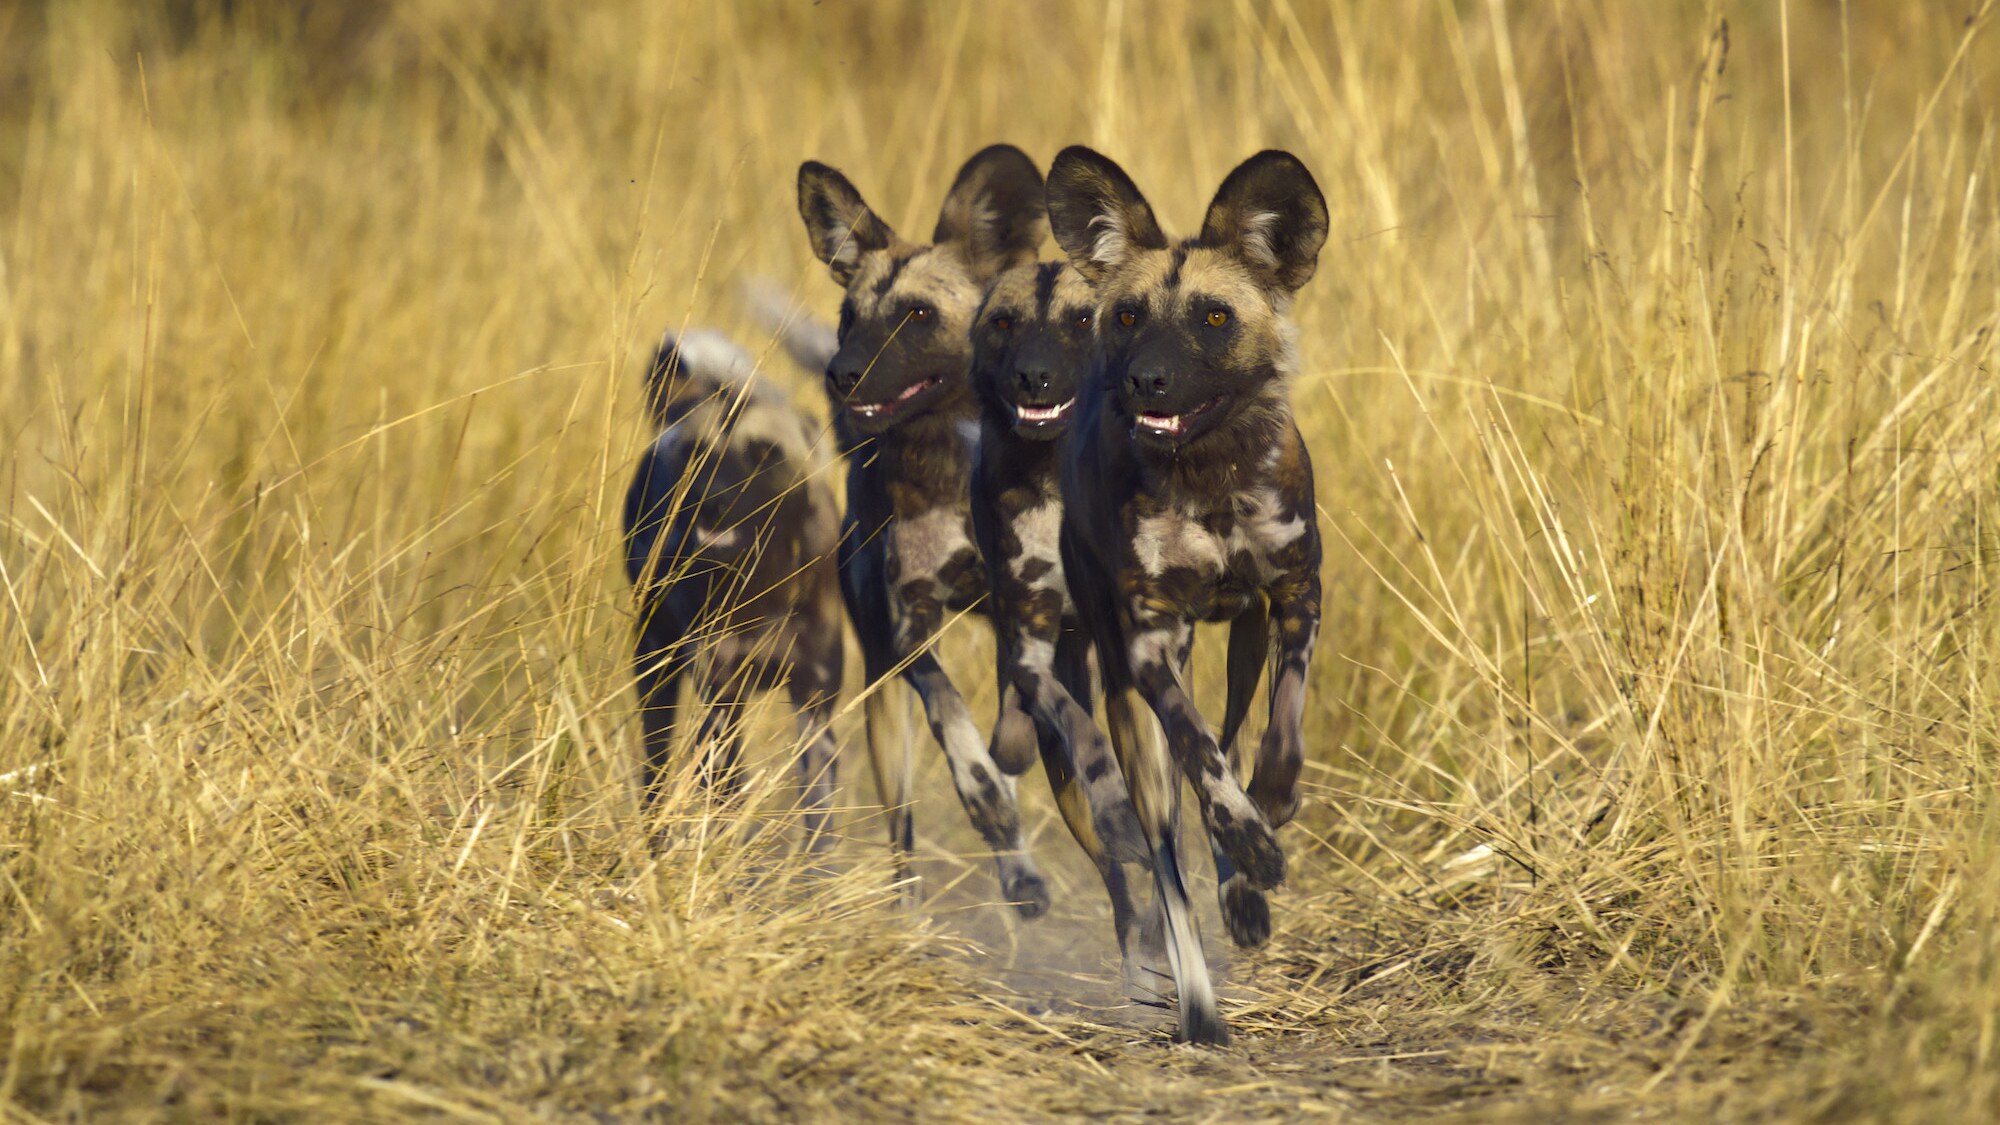 Four wild dogs. (National Geographic for Disney+/Bertie Gregory)